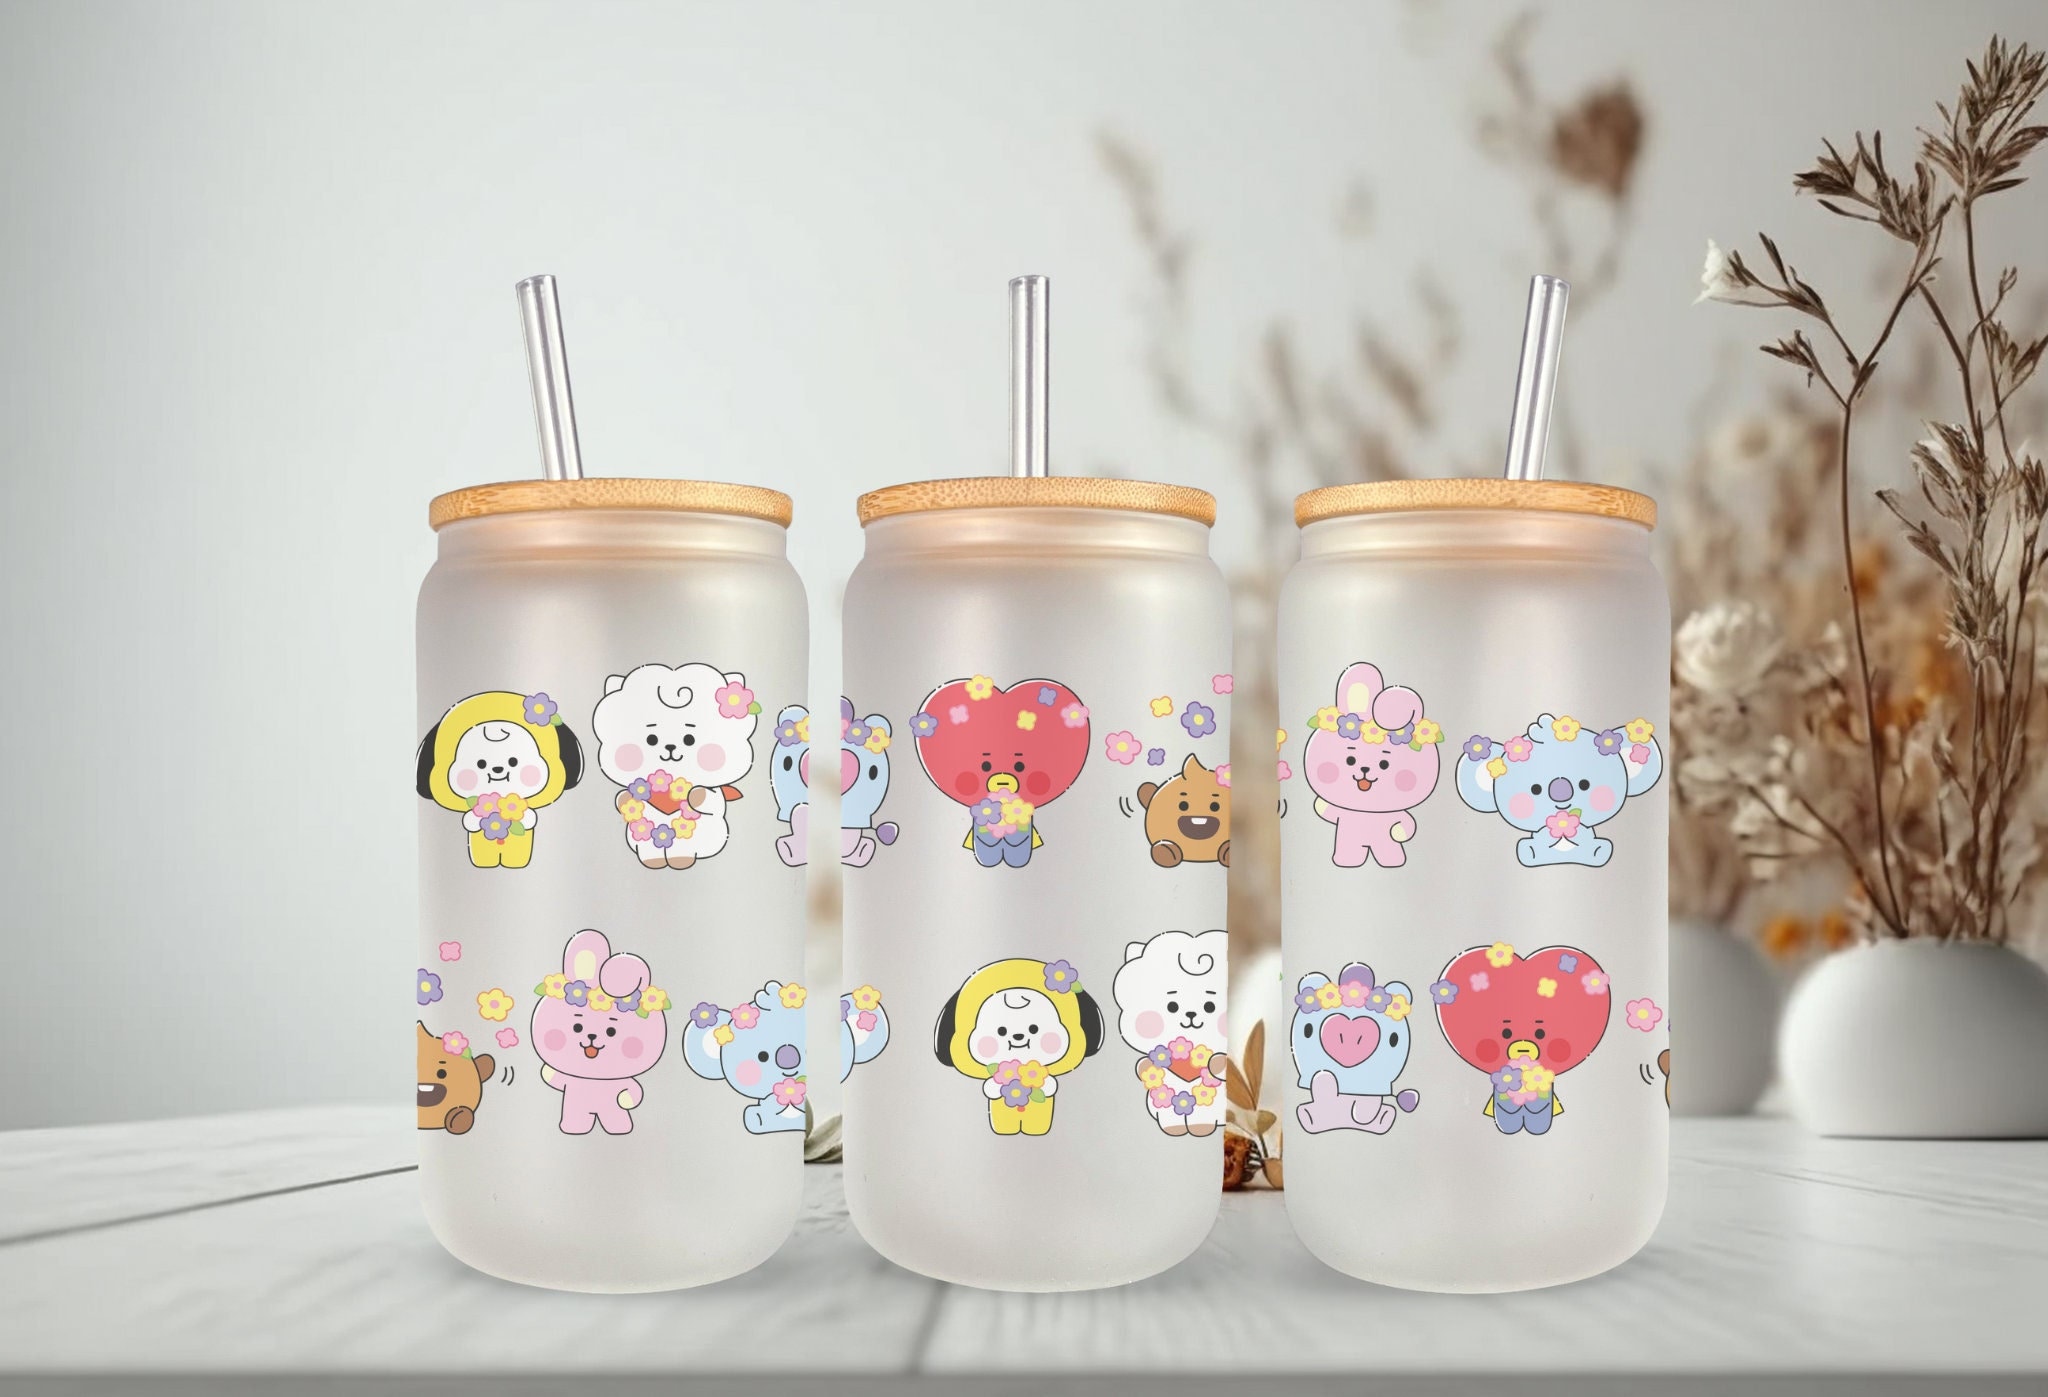 SIPSIP CUP BTS Kpop Glass Cup Korean Cafe Cup Beer Can Glass Soda